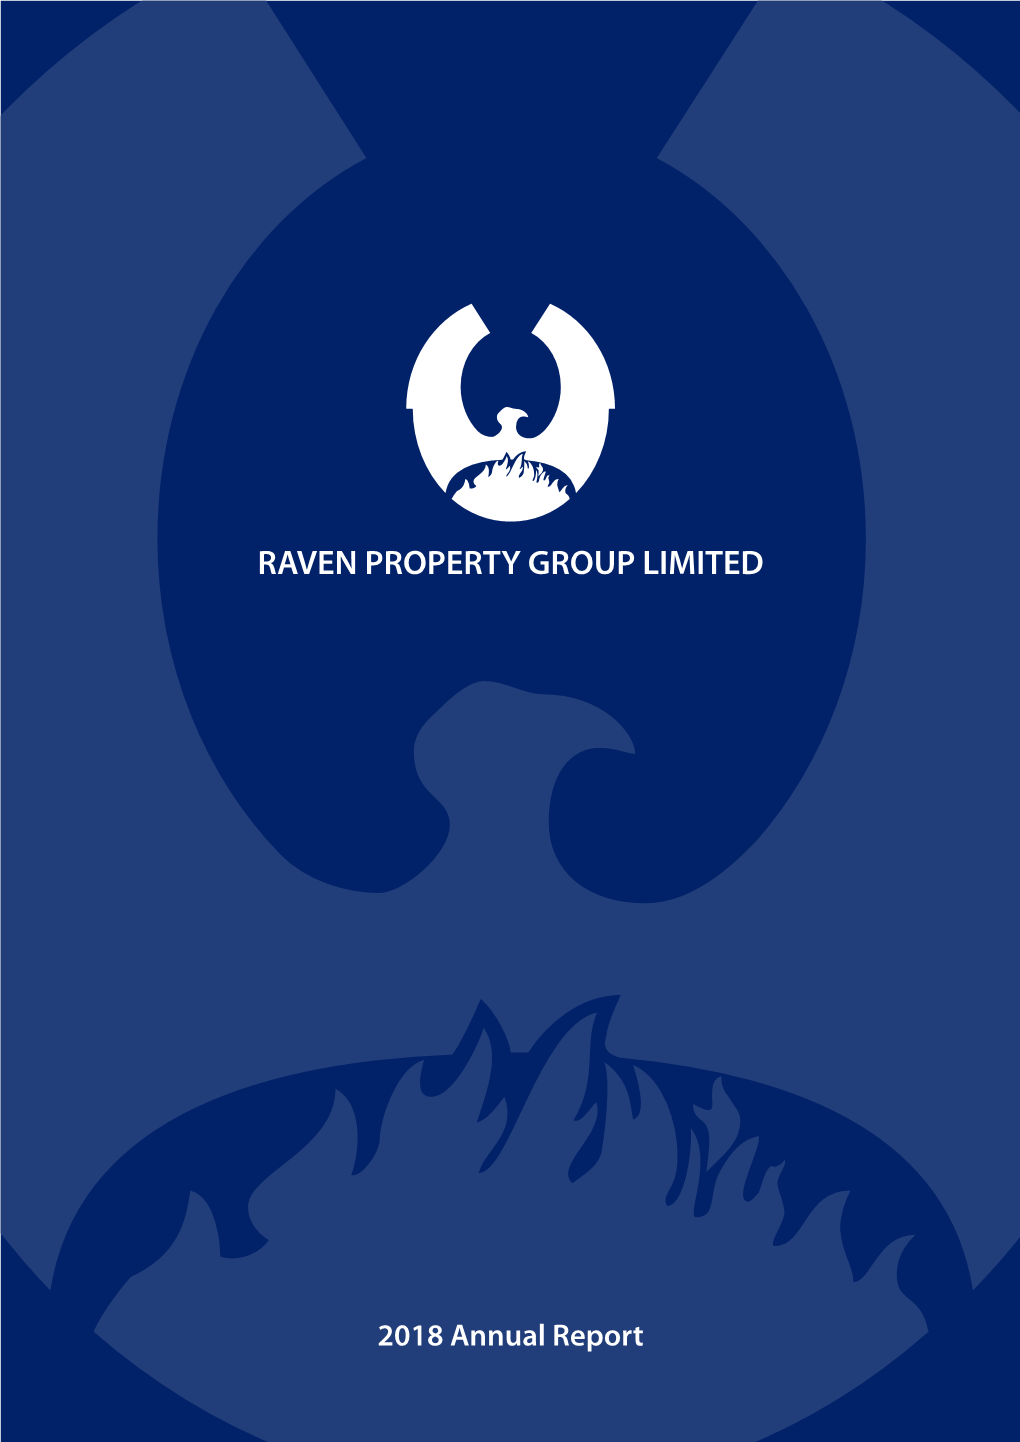 Raven Property Group Limited